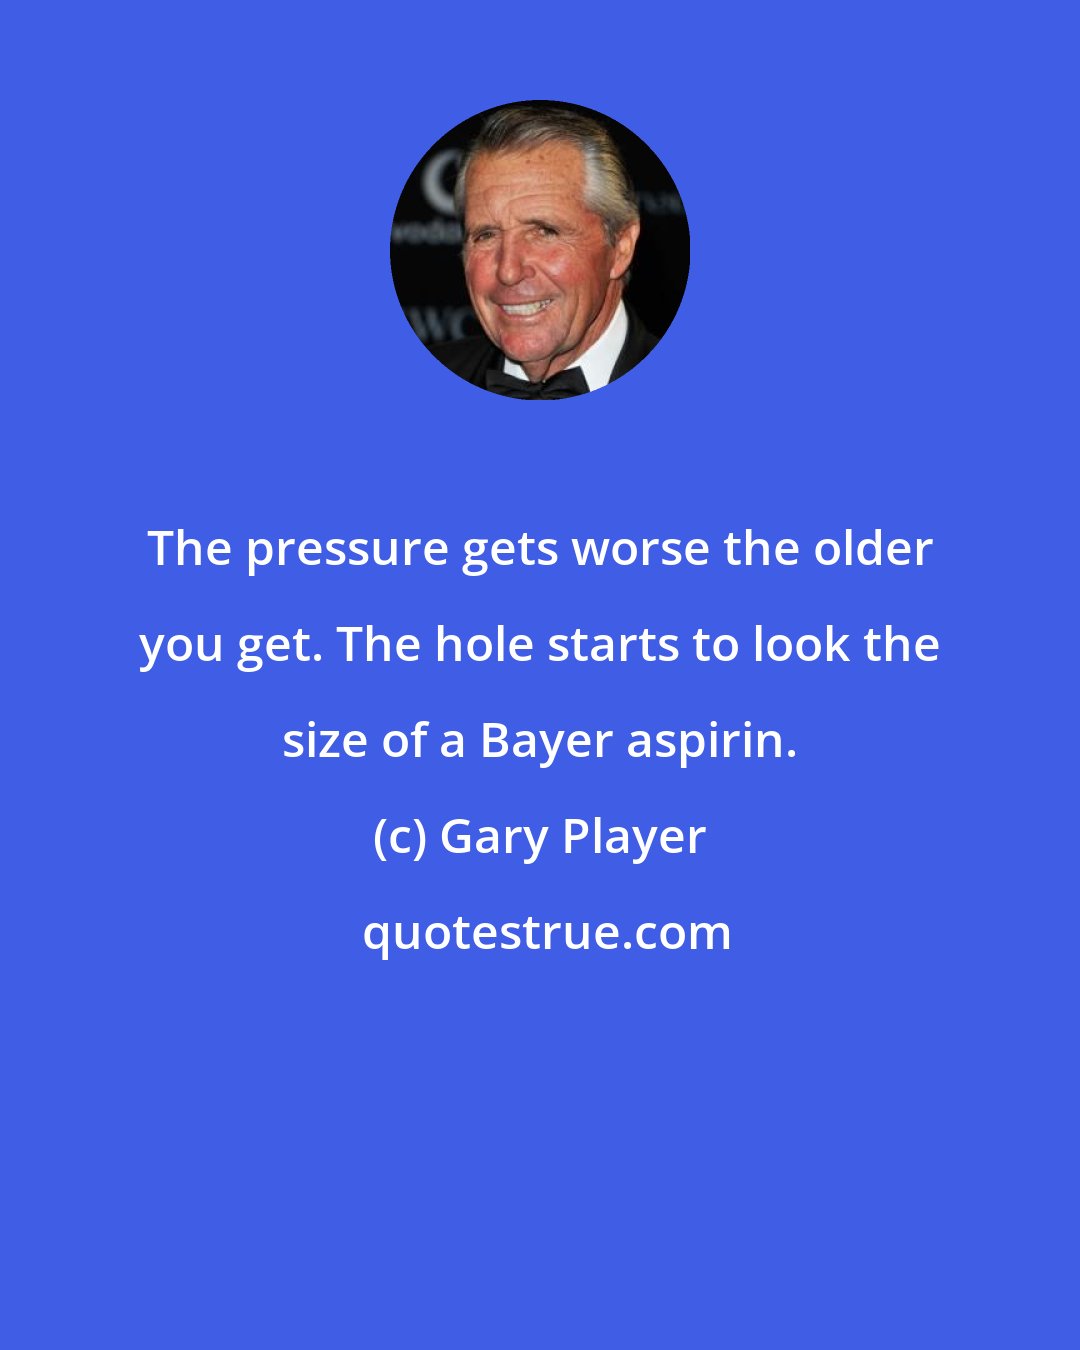 Gary Player: The pressure gets worse the older you get. The hole starts to look the size of a Bayer aspirin.